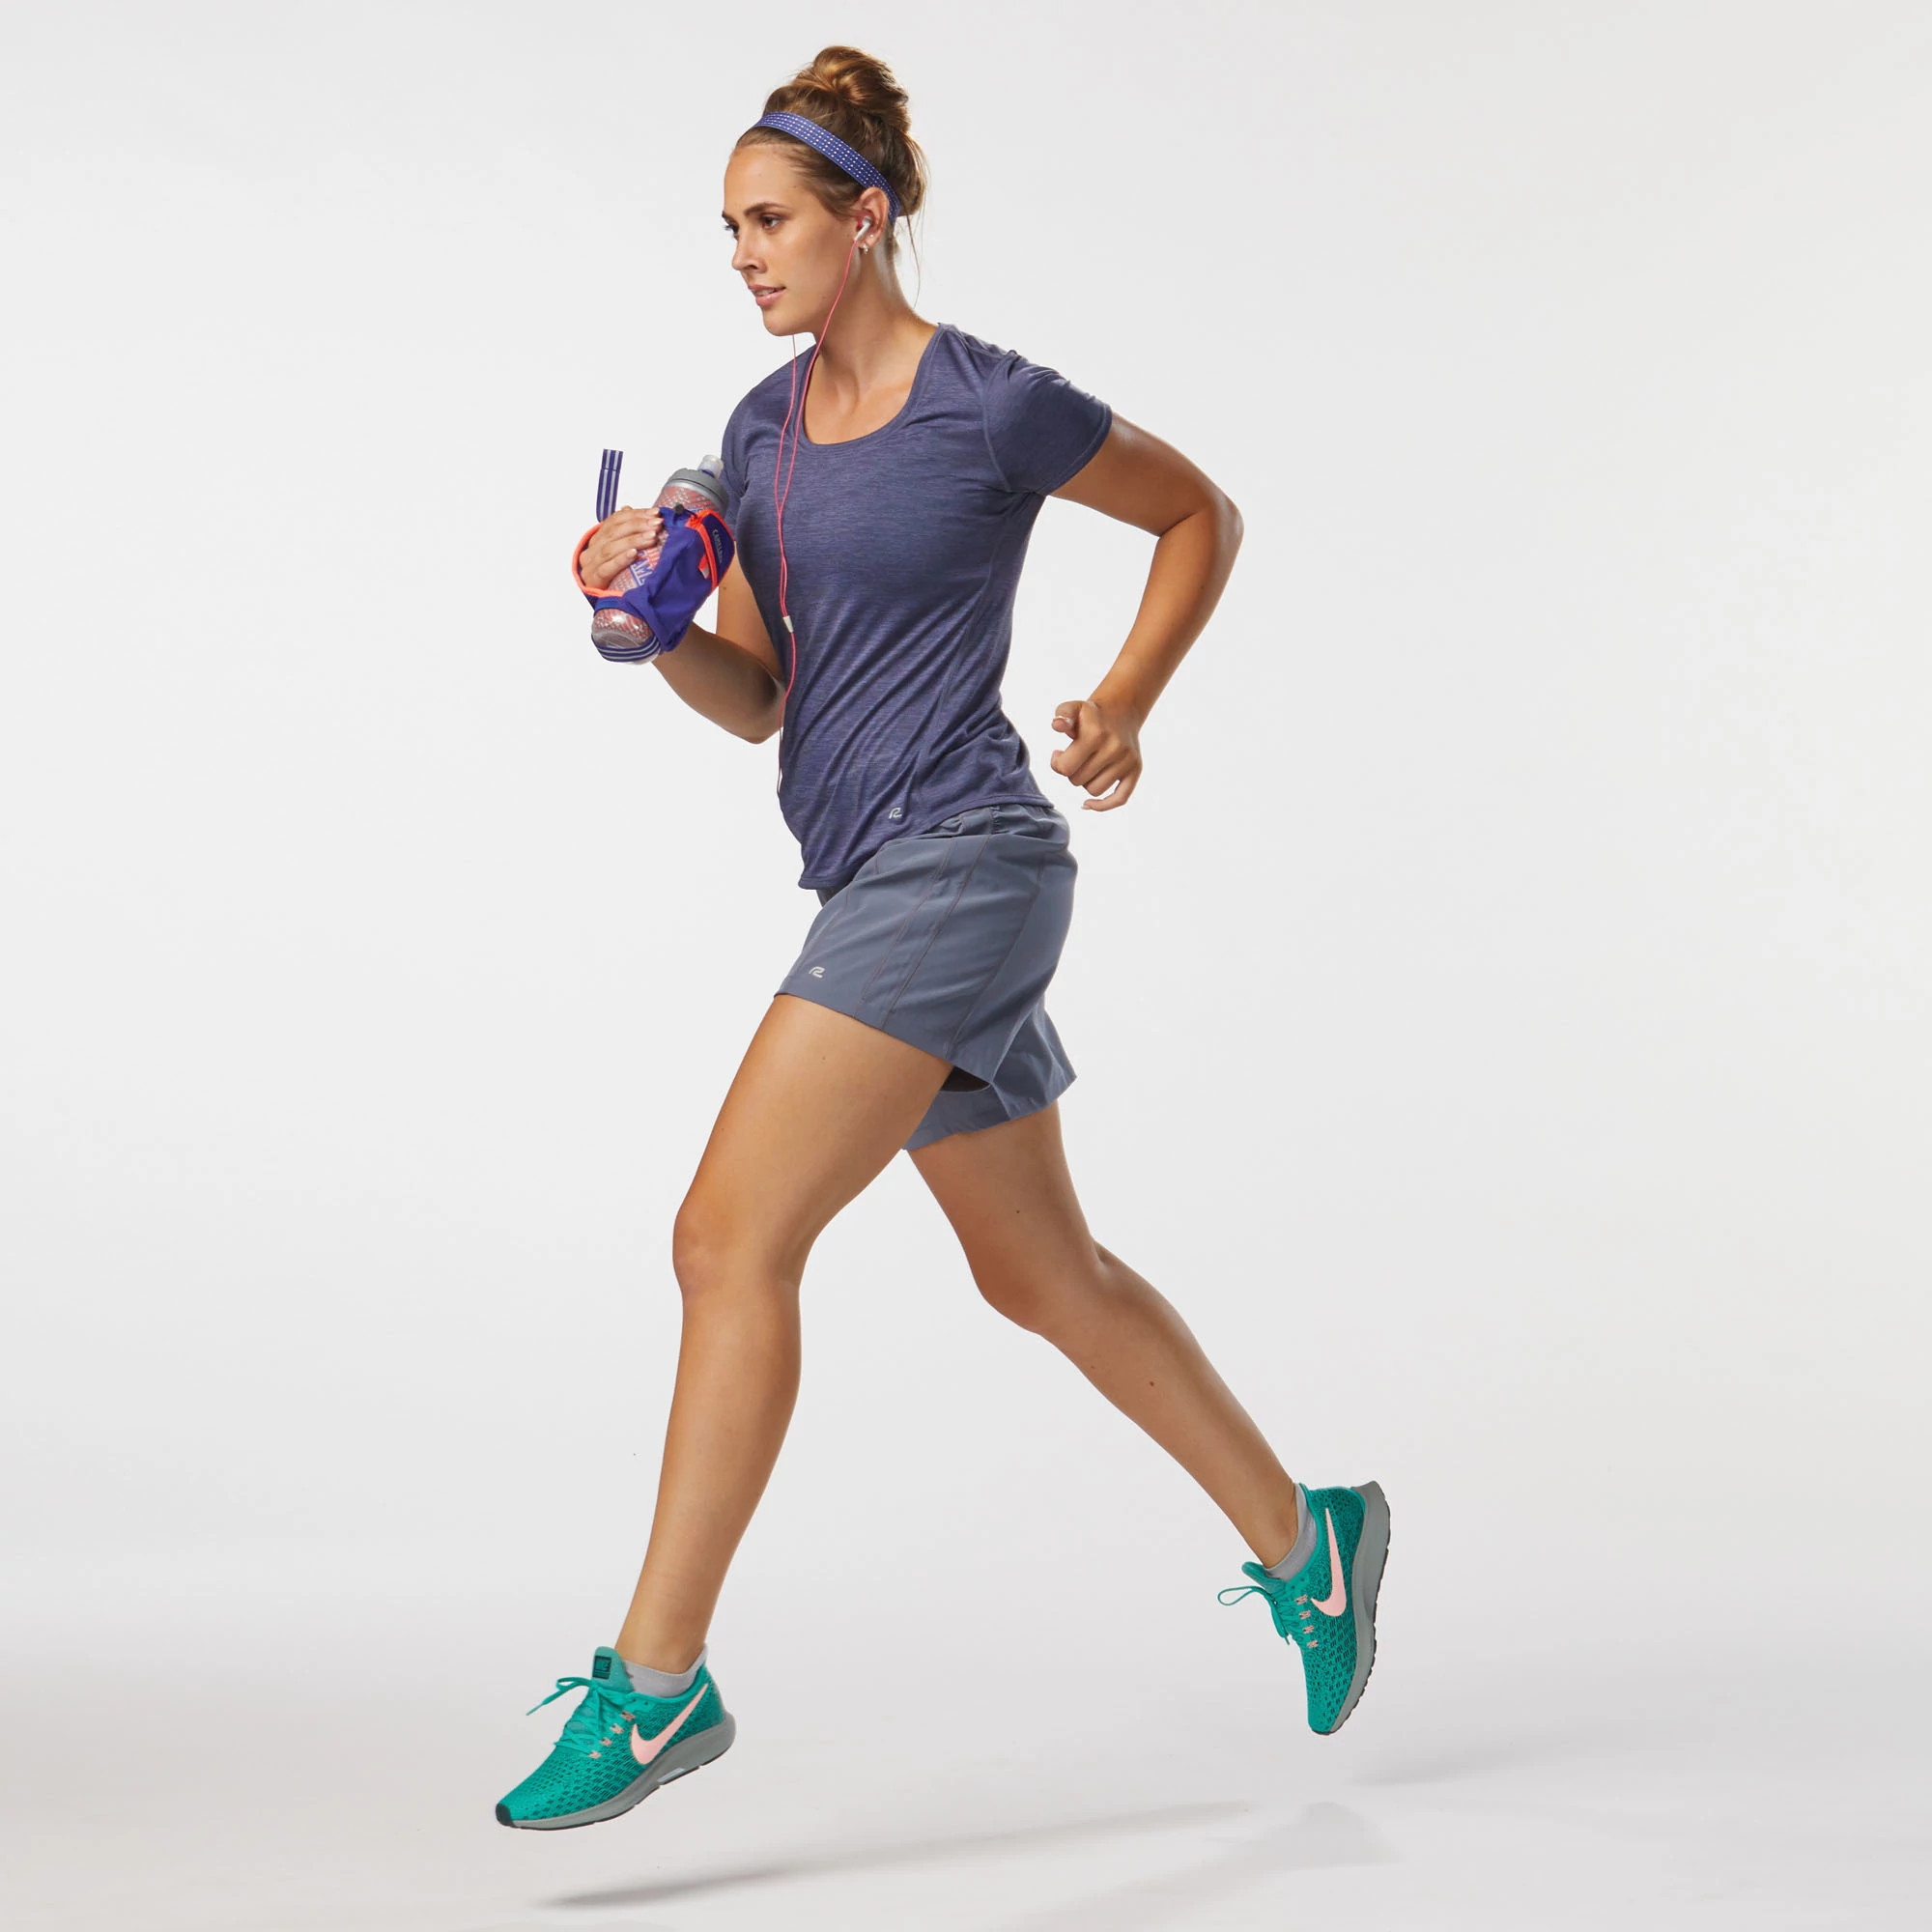 More For Less: 9 Affordable Running Clothes For Women - Road Runner Sports